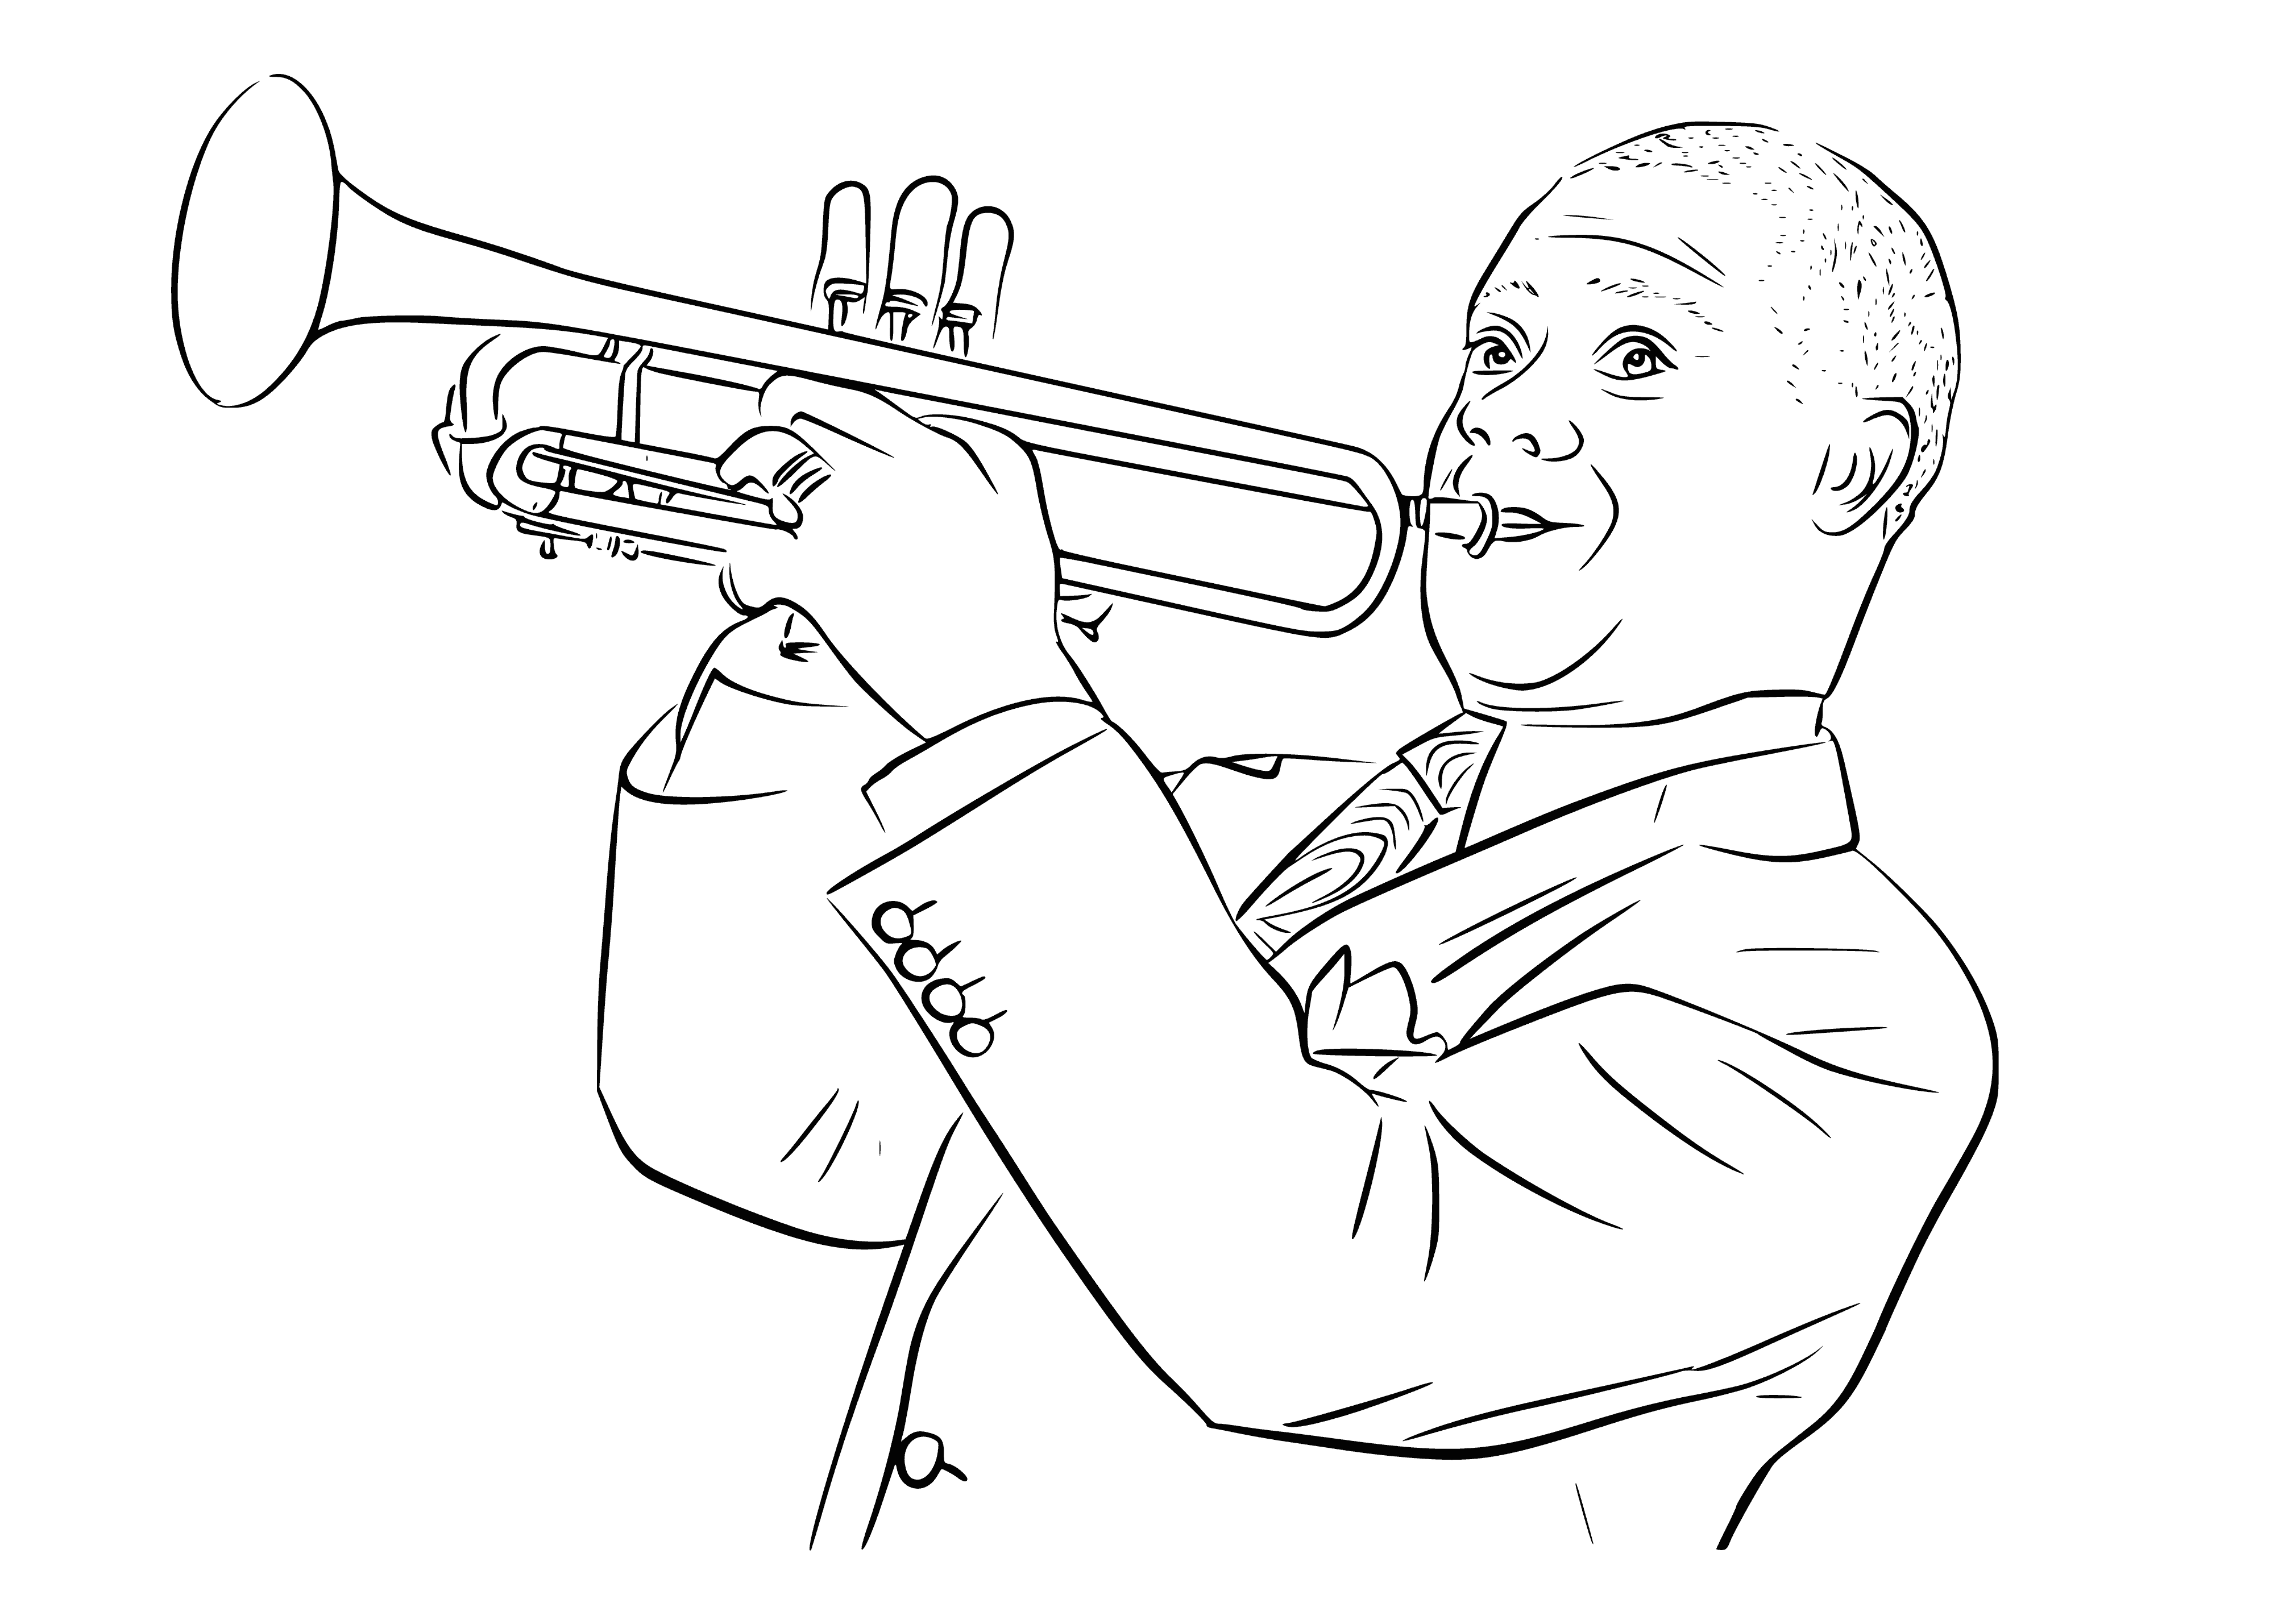 coloring page: Man playing trumpet with mustache and polka dot tie.